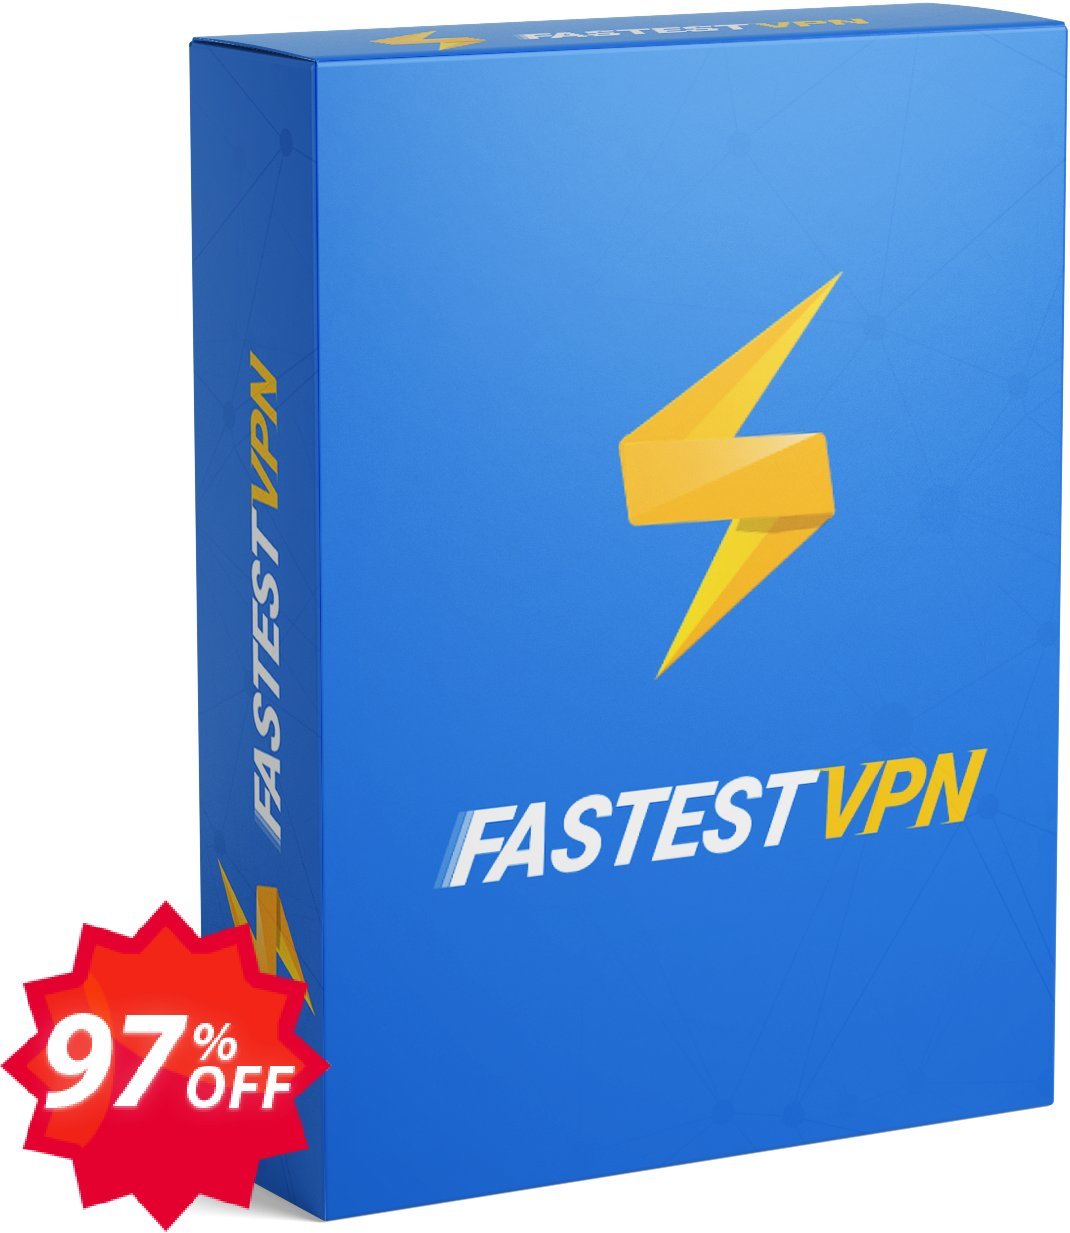 FastestVPN 5 Years Coupon code 97% discount 